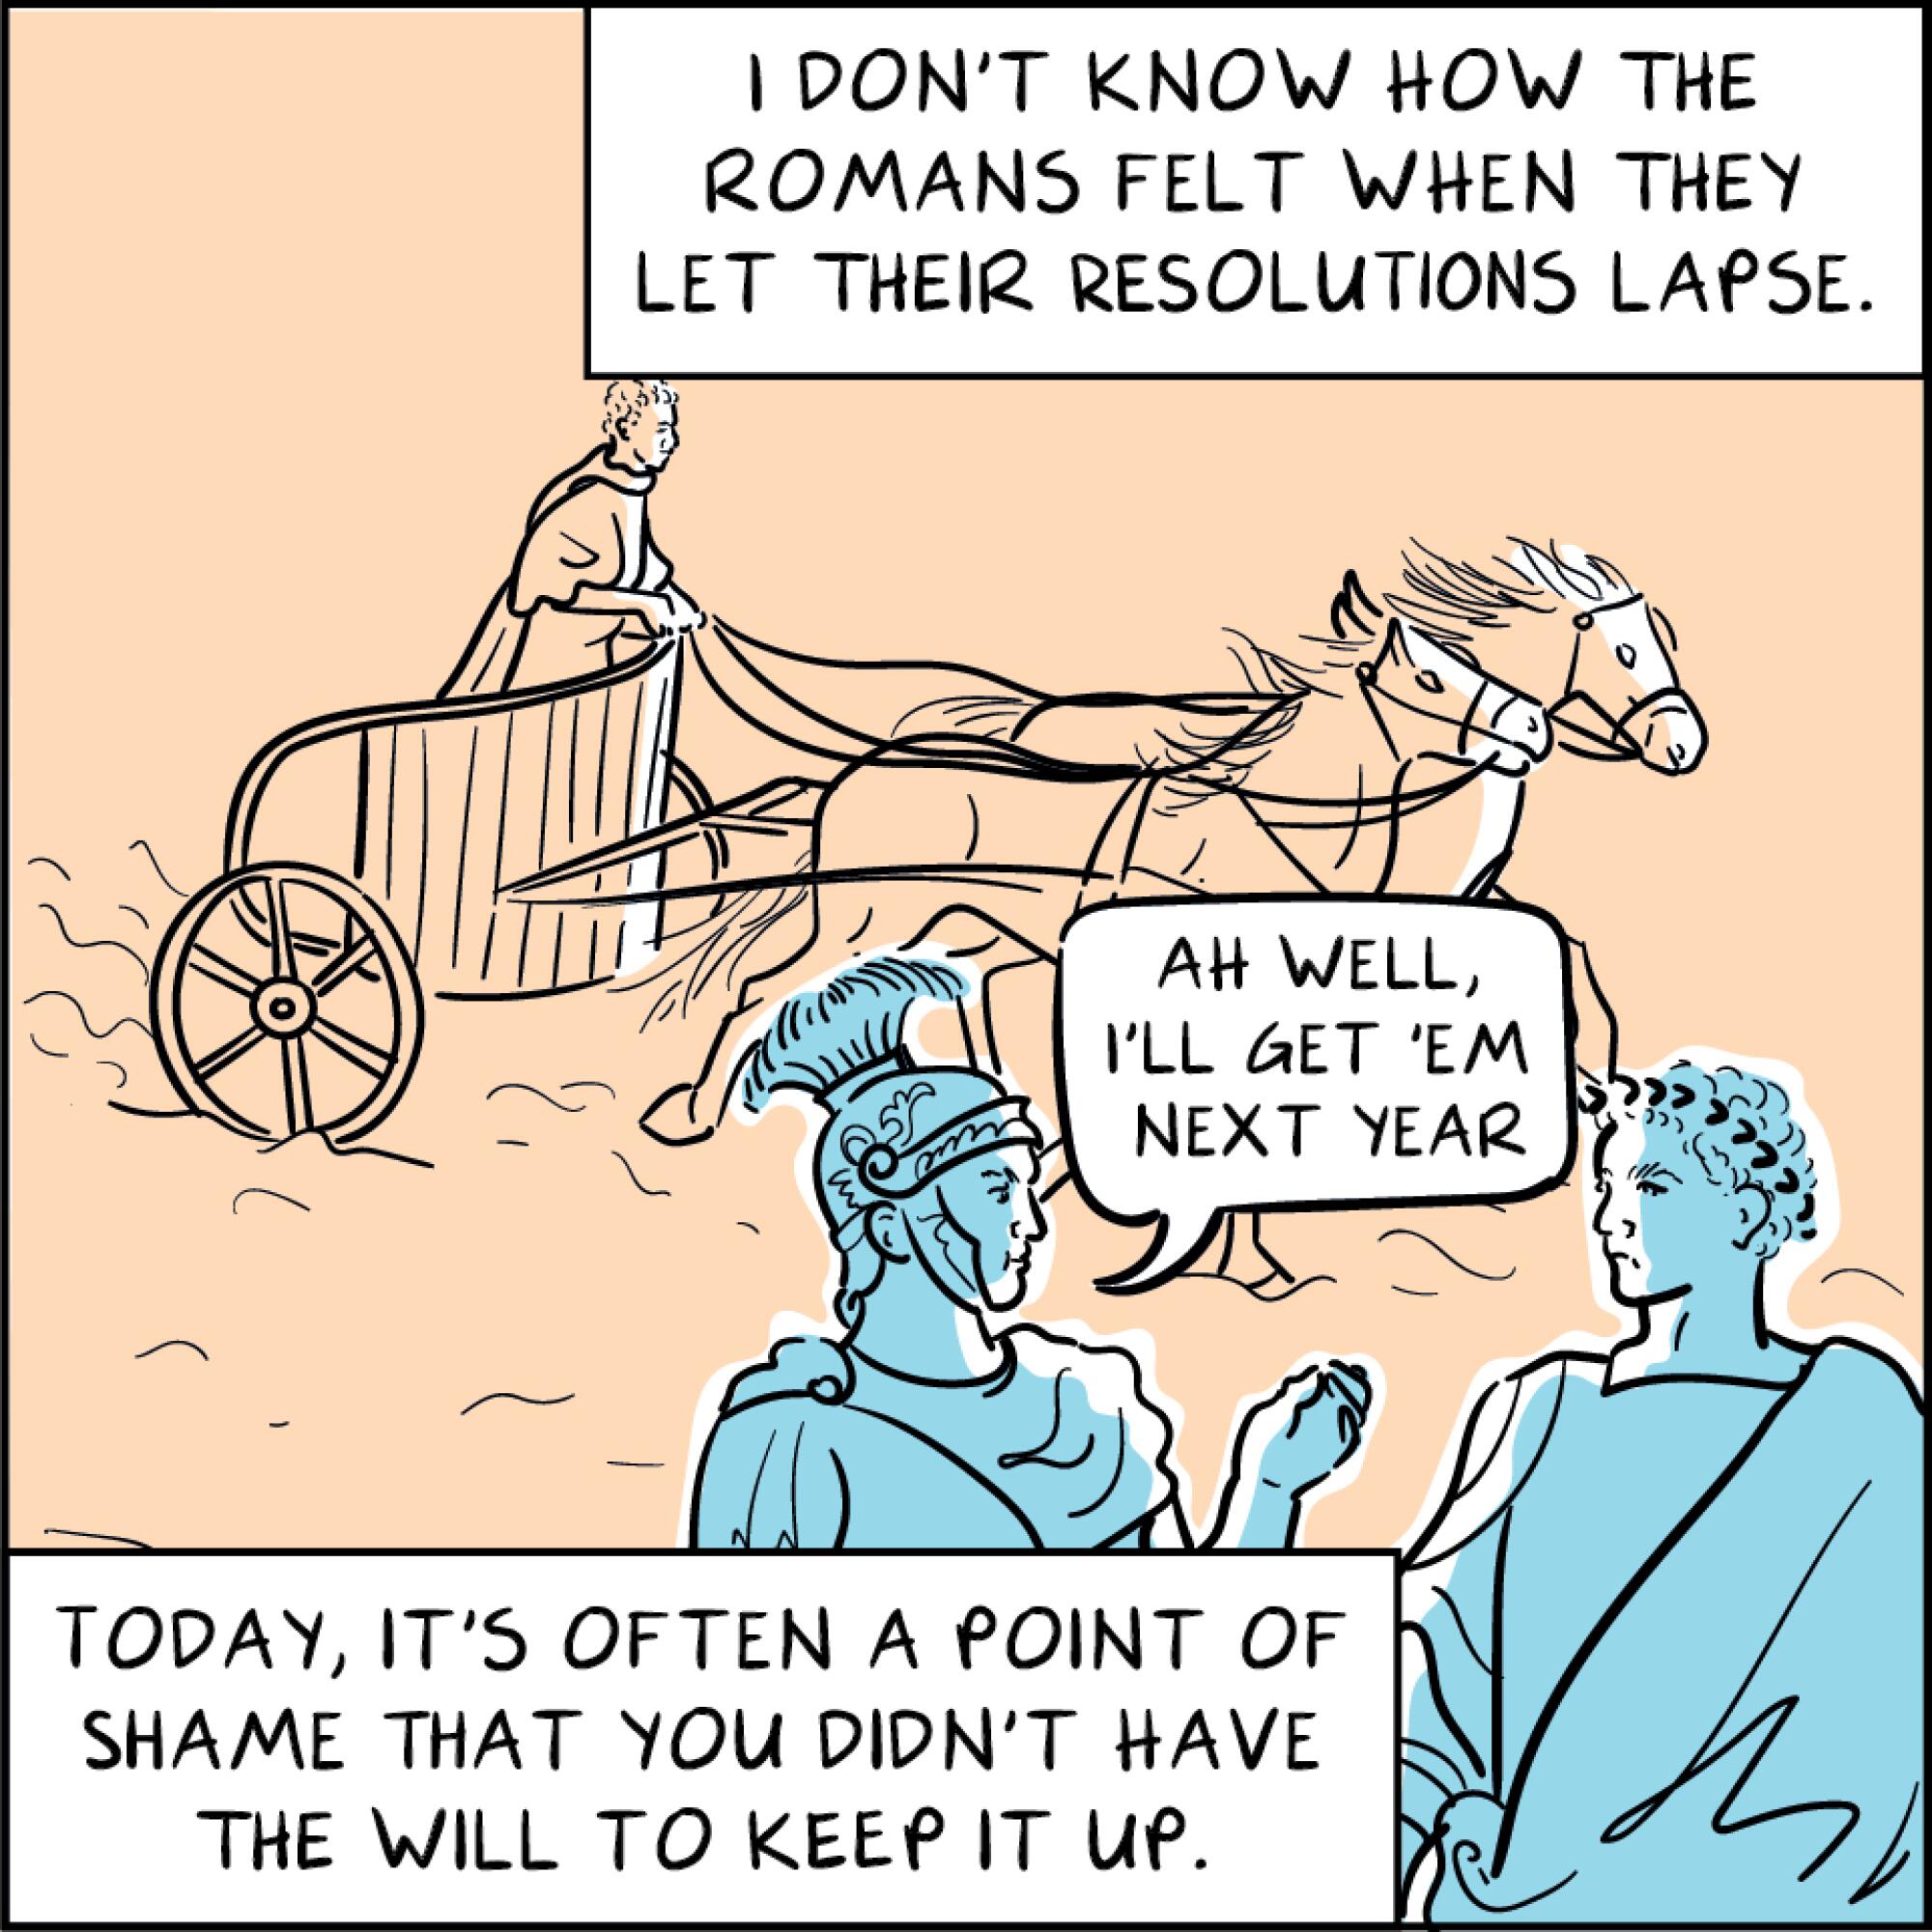 I don't know how romans felt when they let their resolutions lapse, today it's often a point of shame